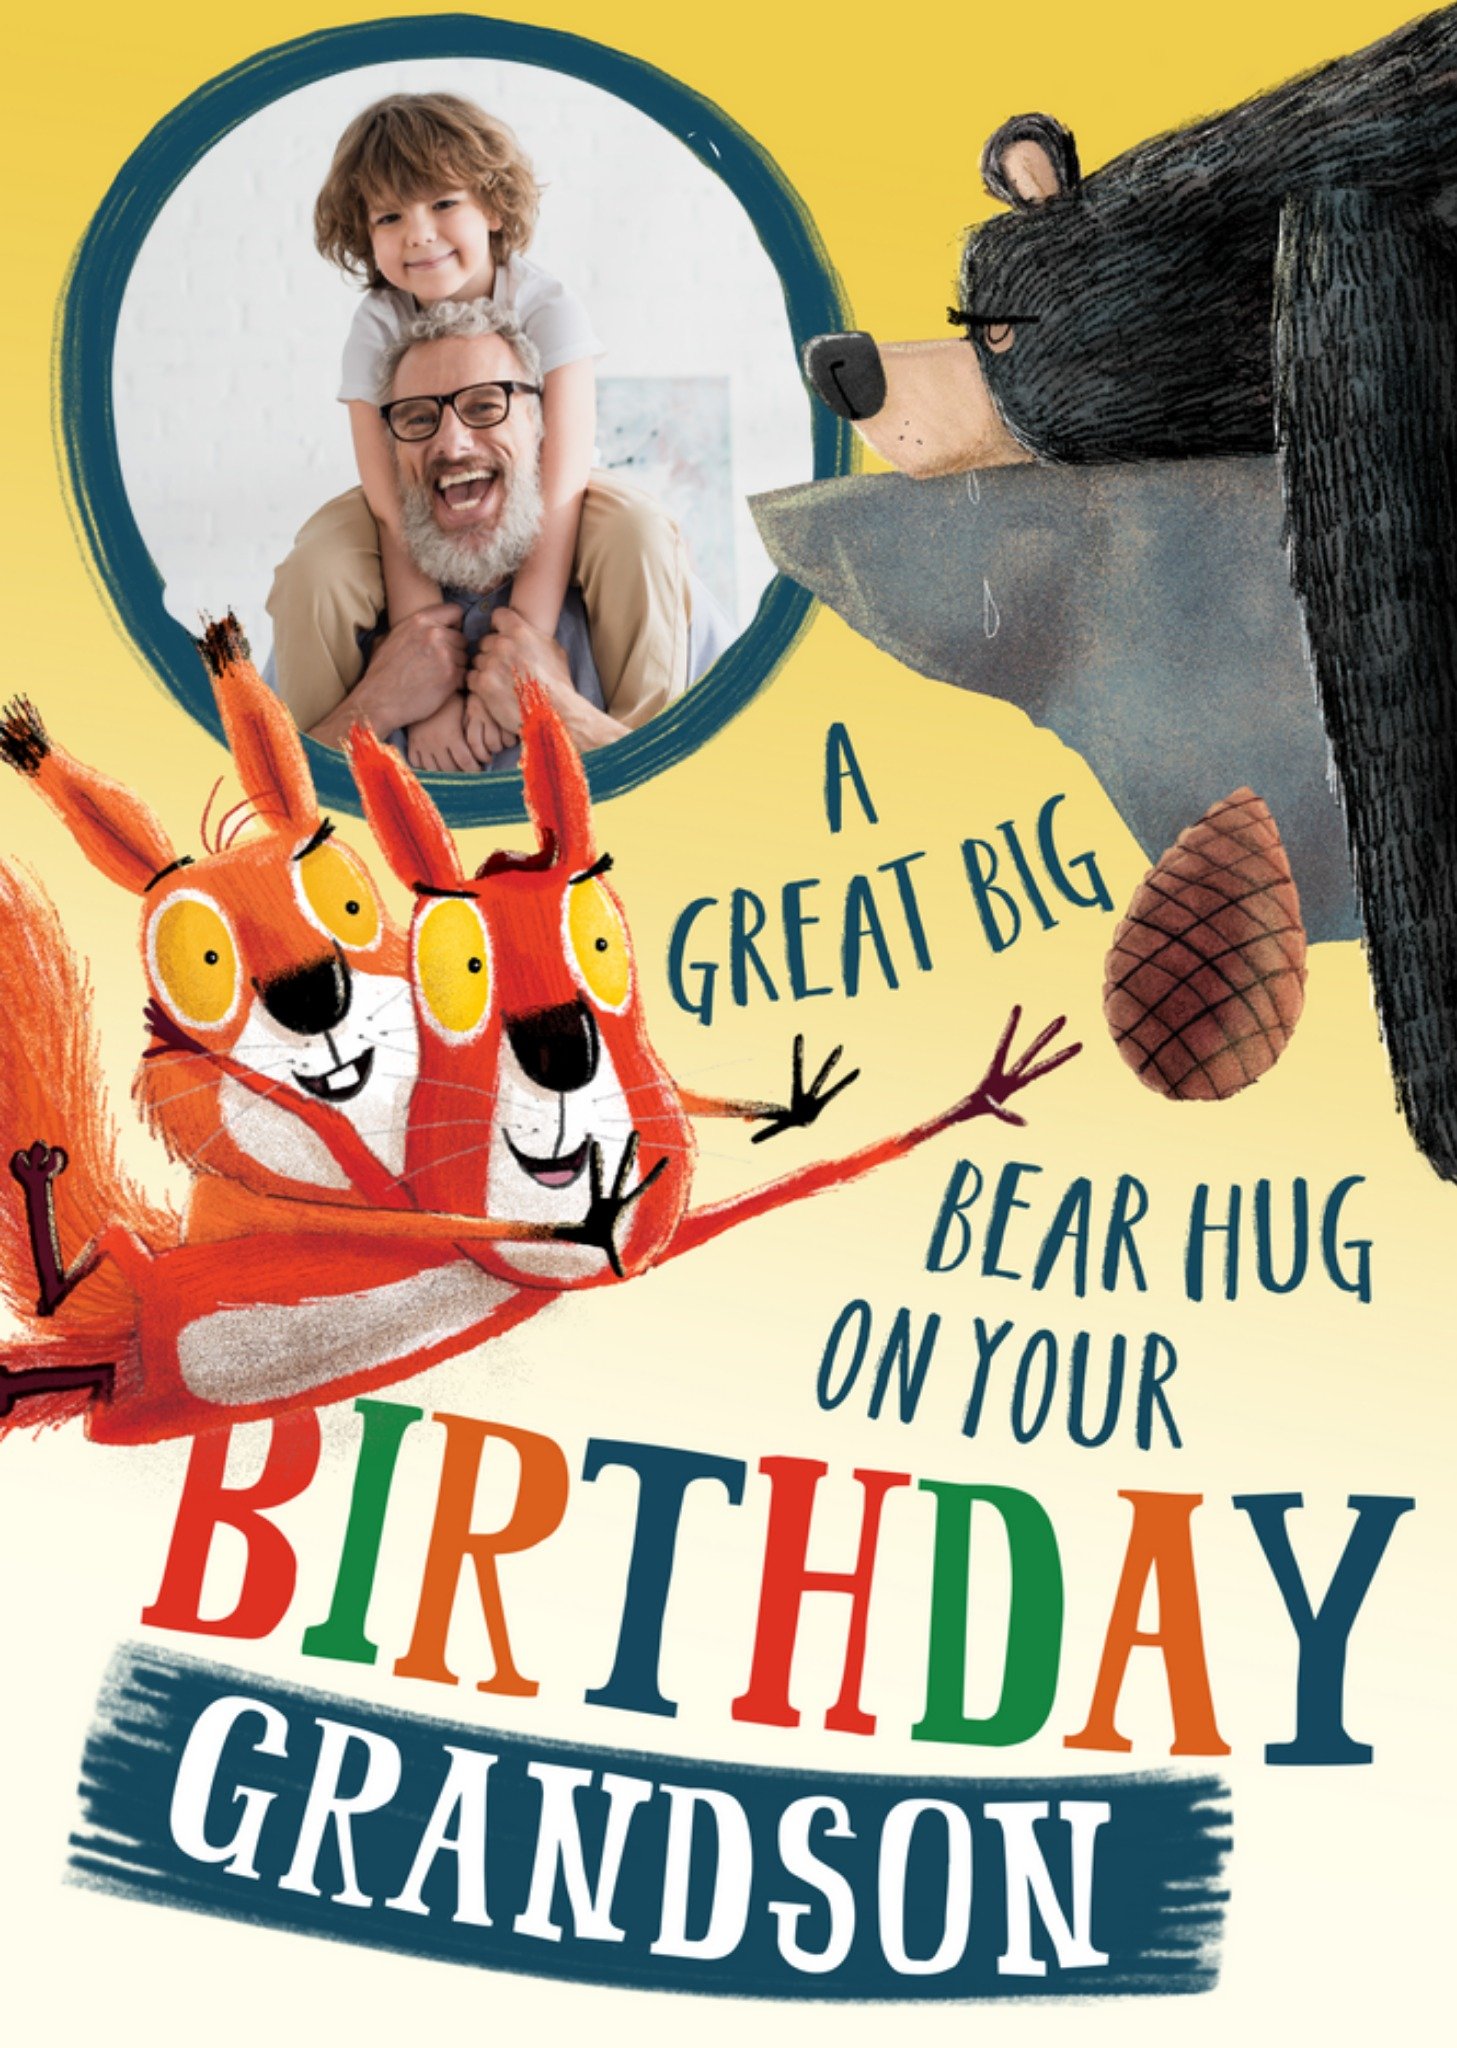 Moonpig A Great Big Bear Hug On Your Birthday Grandson Illustrated Squirrels And A Bear Photo Upload